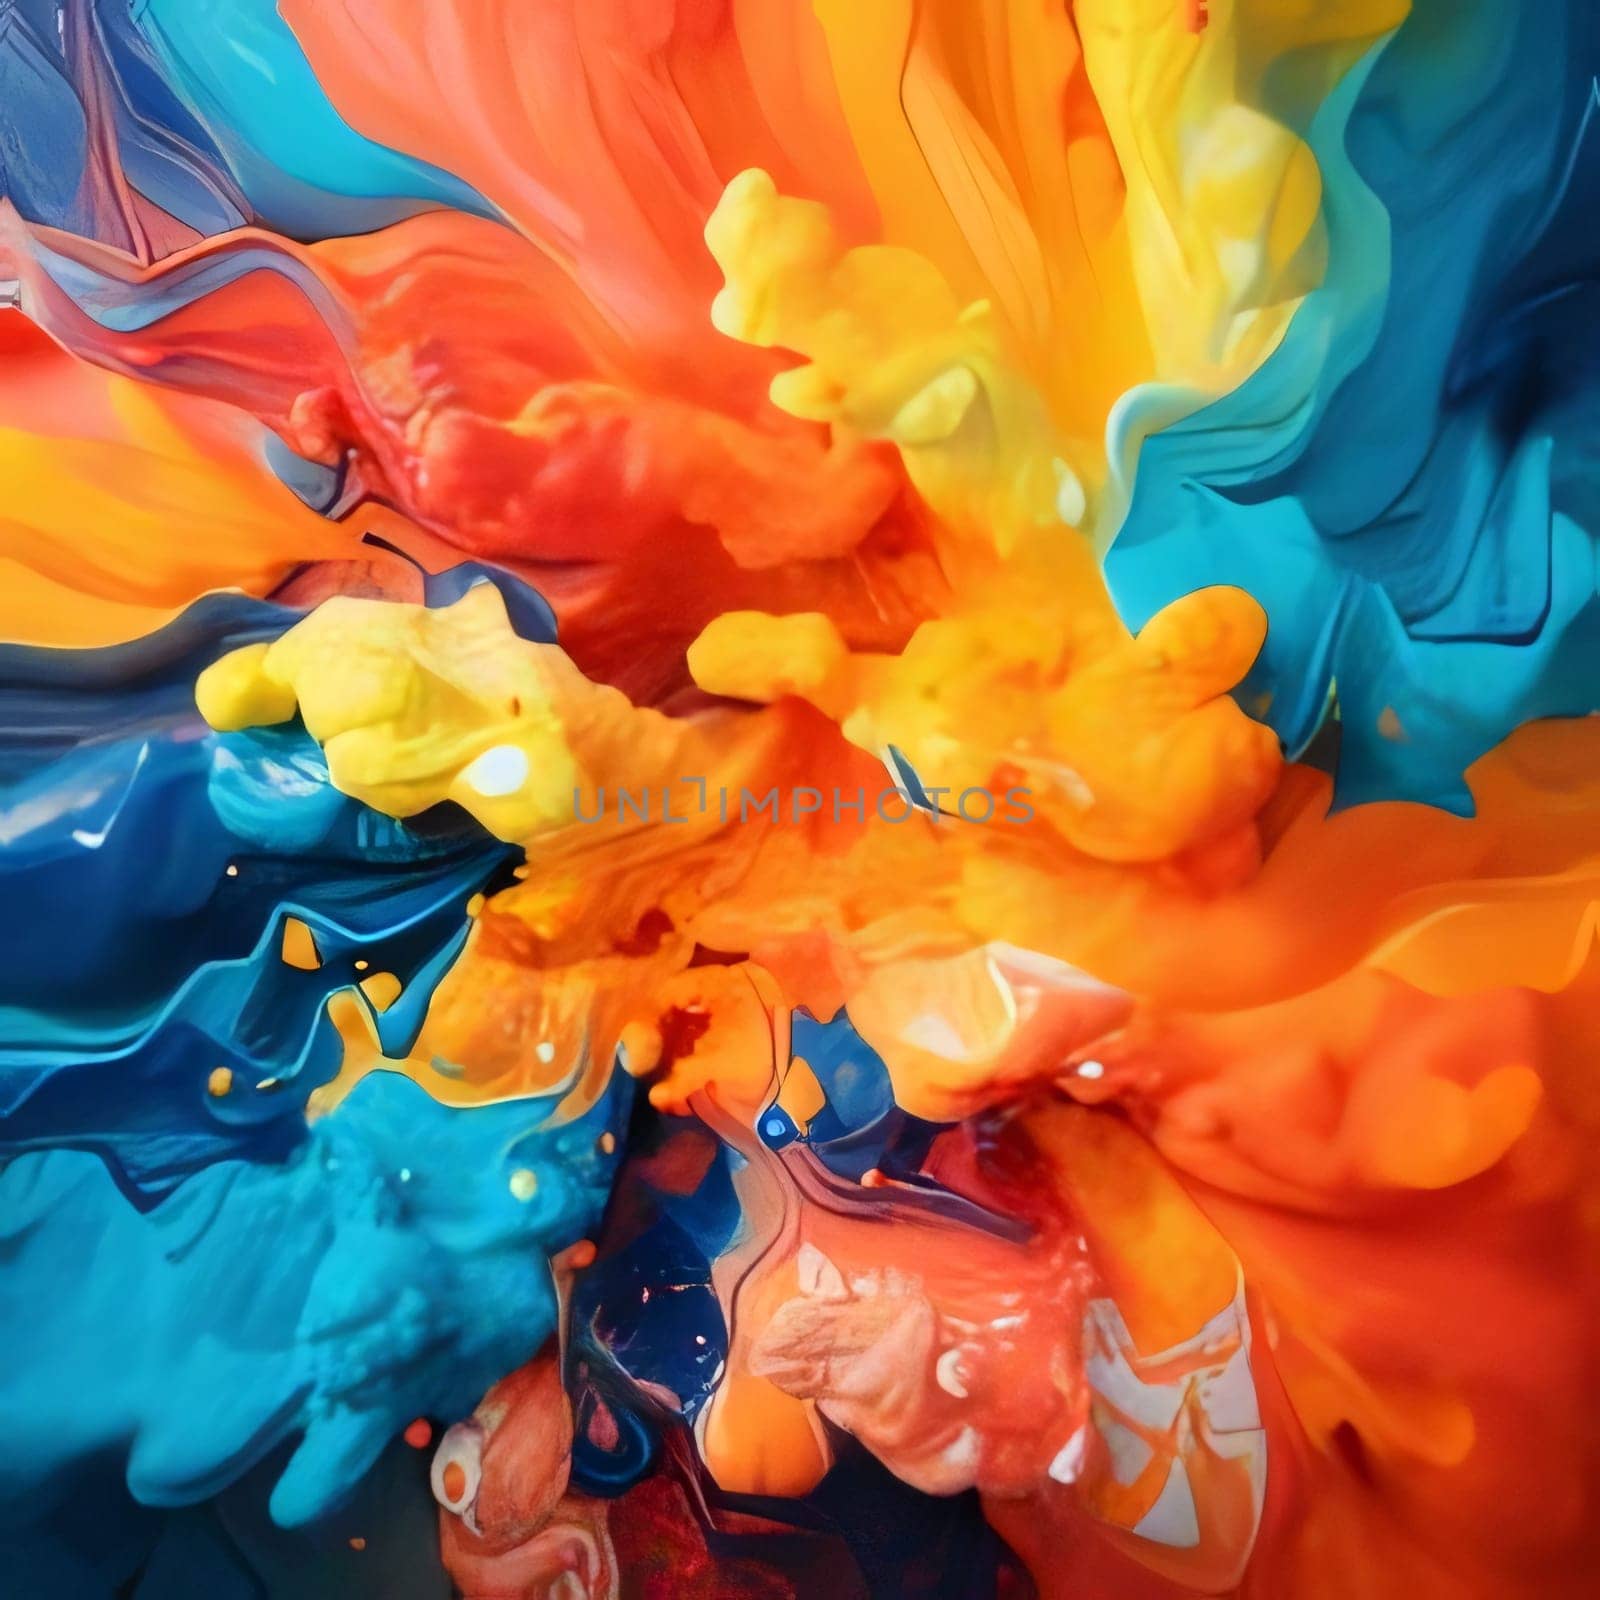 Abstract background design: abstract background with blue, orange and yellow paint mixing in water